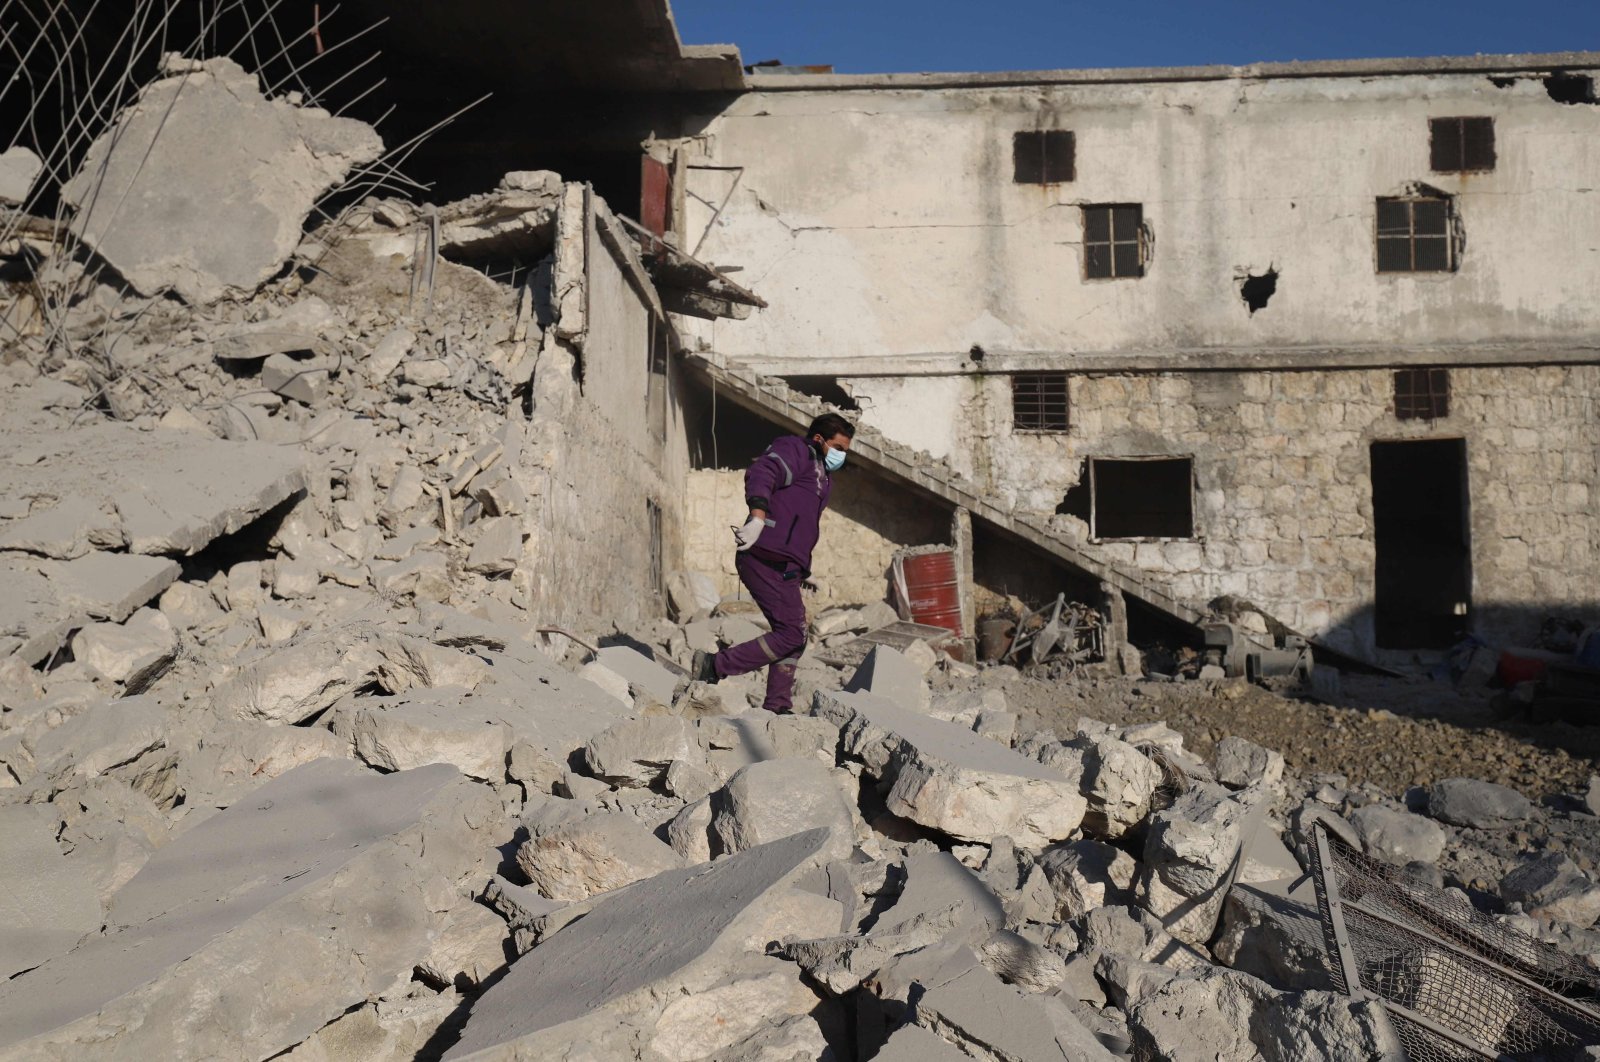 A Syrian man walks amid the rubble of a destroyed building following reported Russian airstrikes on the outskirts of the northwestern city of Idlib, Syria, March 29, 2021. (Photo by Abdulaziz Ketaz via AFP)